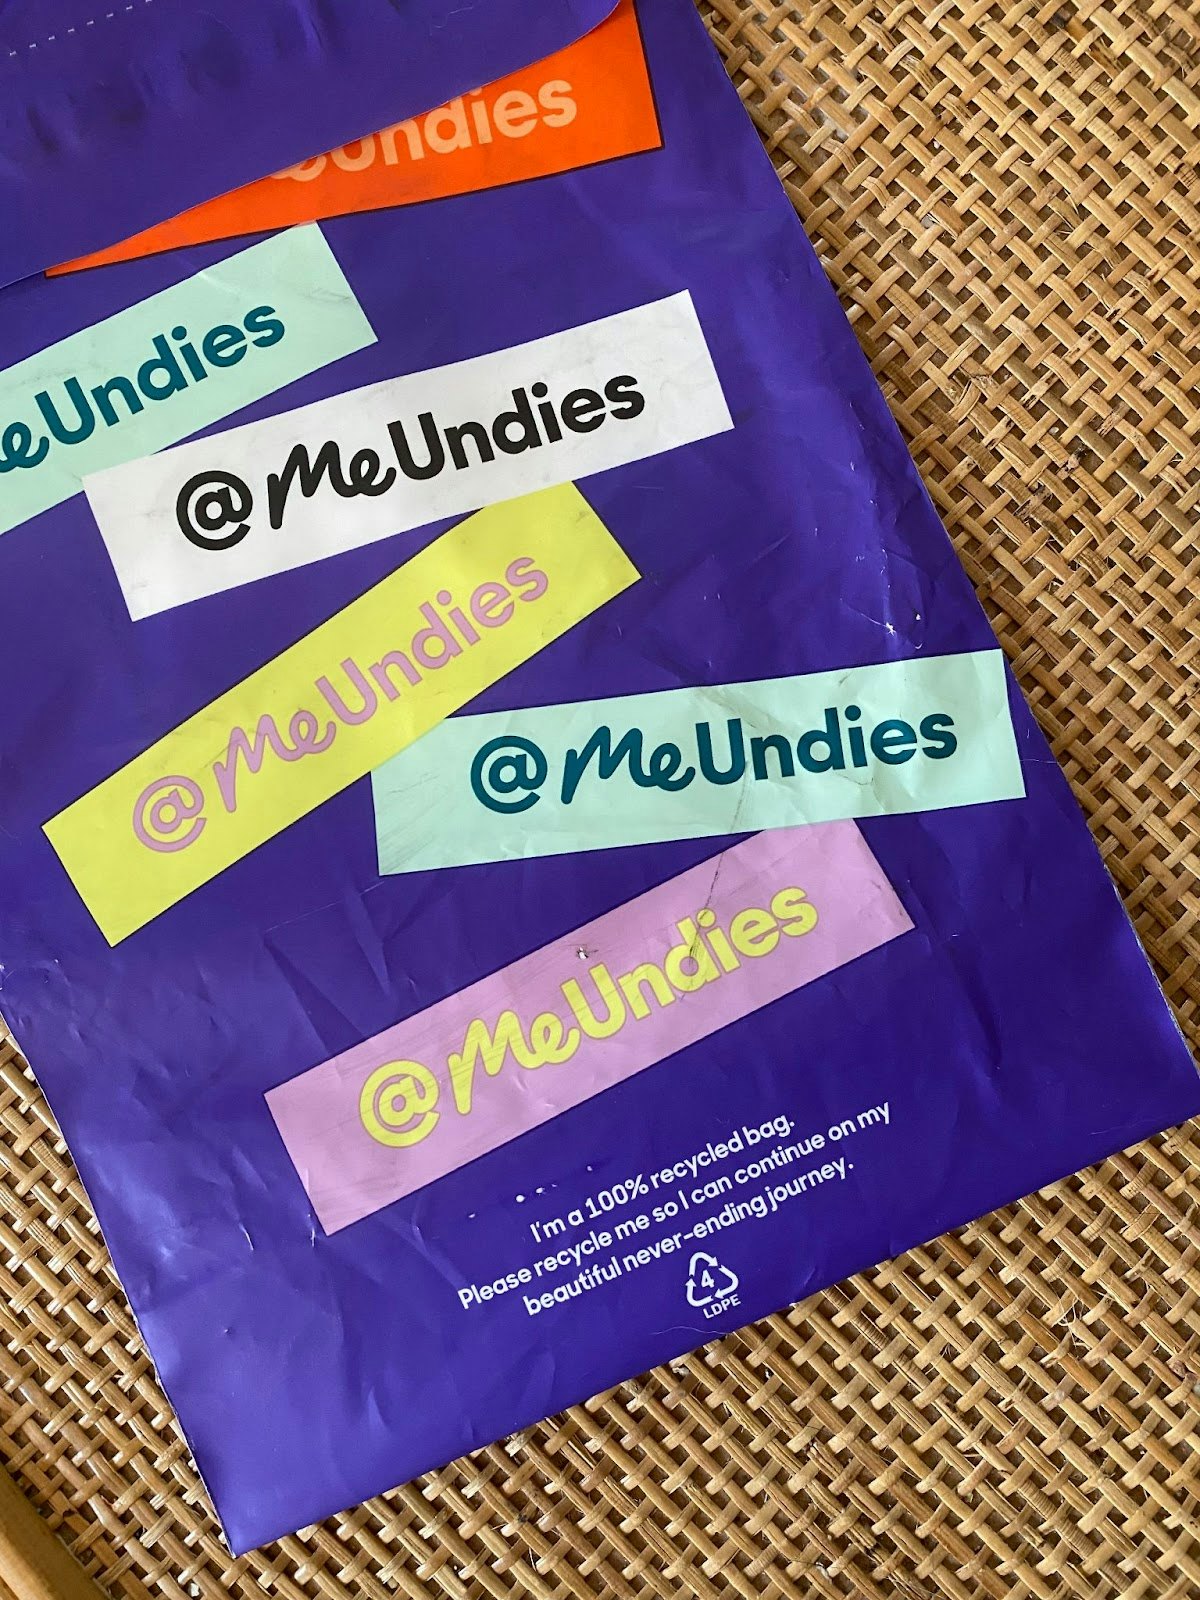 An Honest Review of MeUndies Boxers, According To A Non-Binary Person